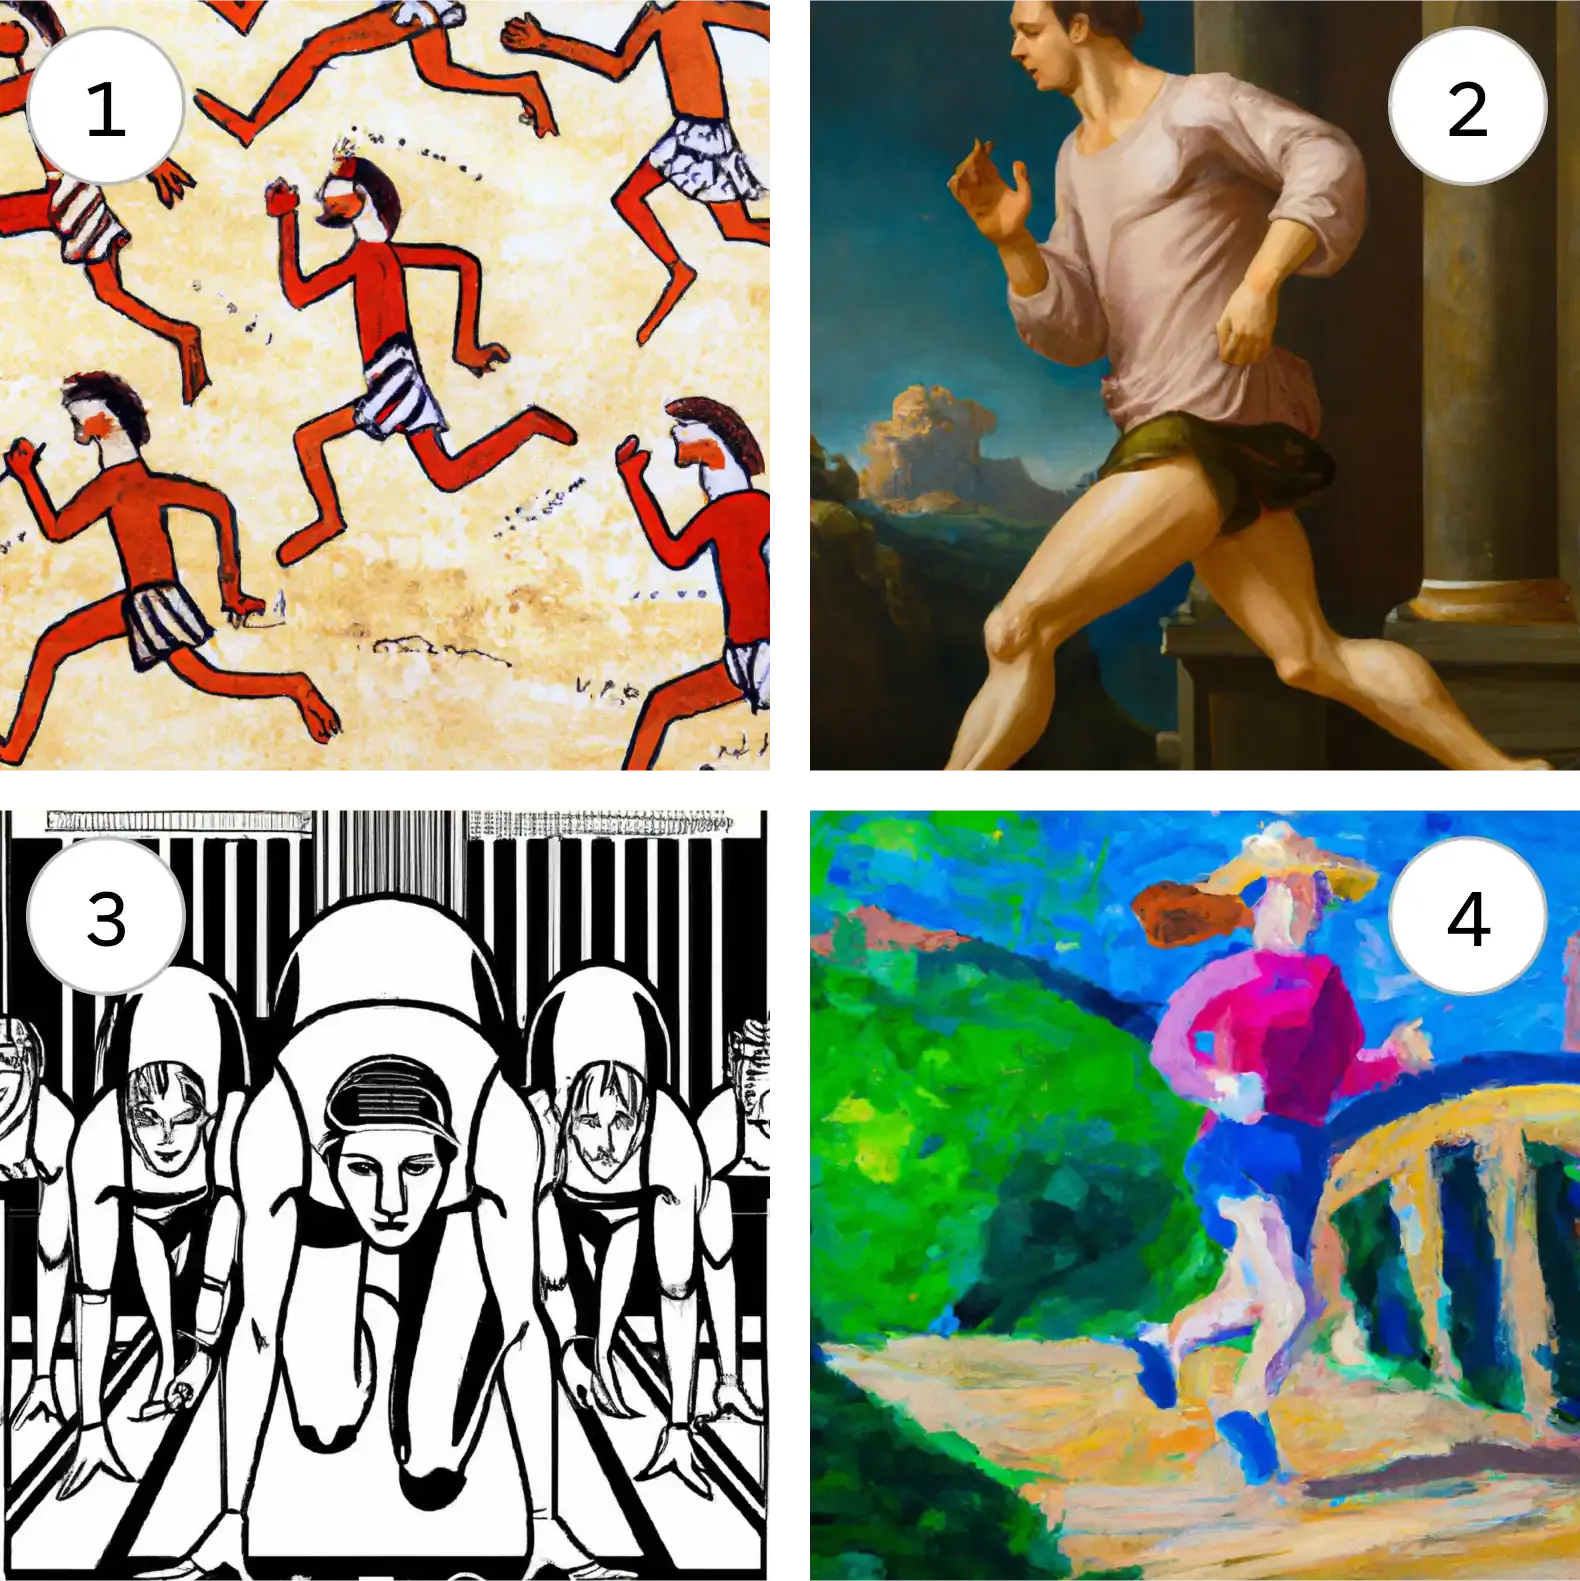 Four different images of people running, rendered in different artistic styles.